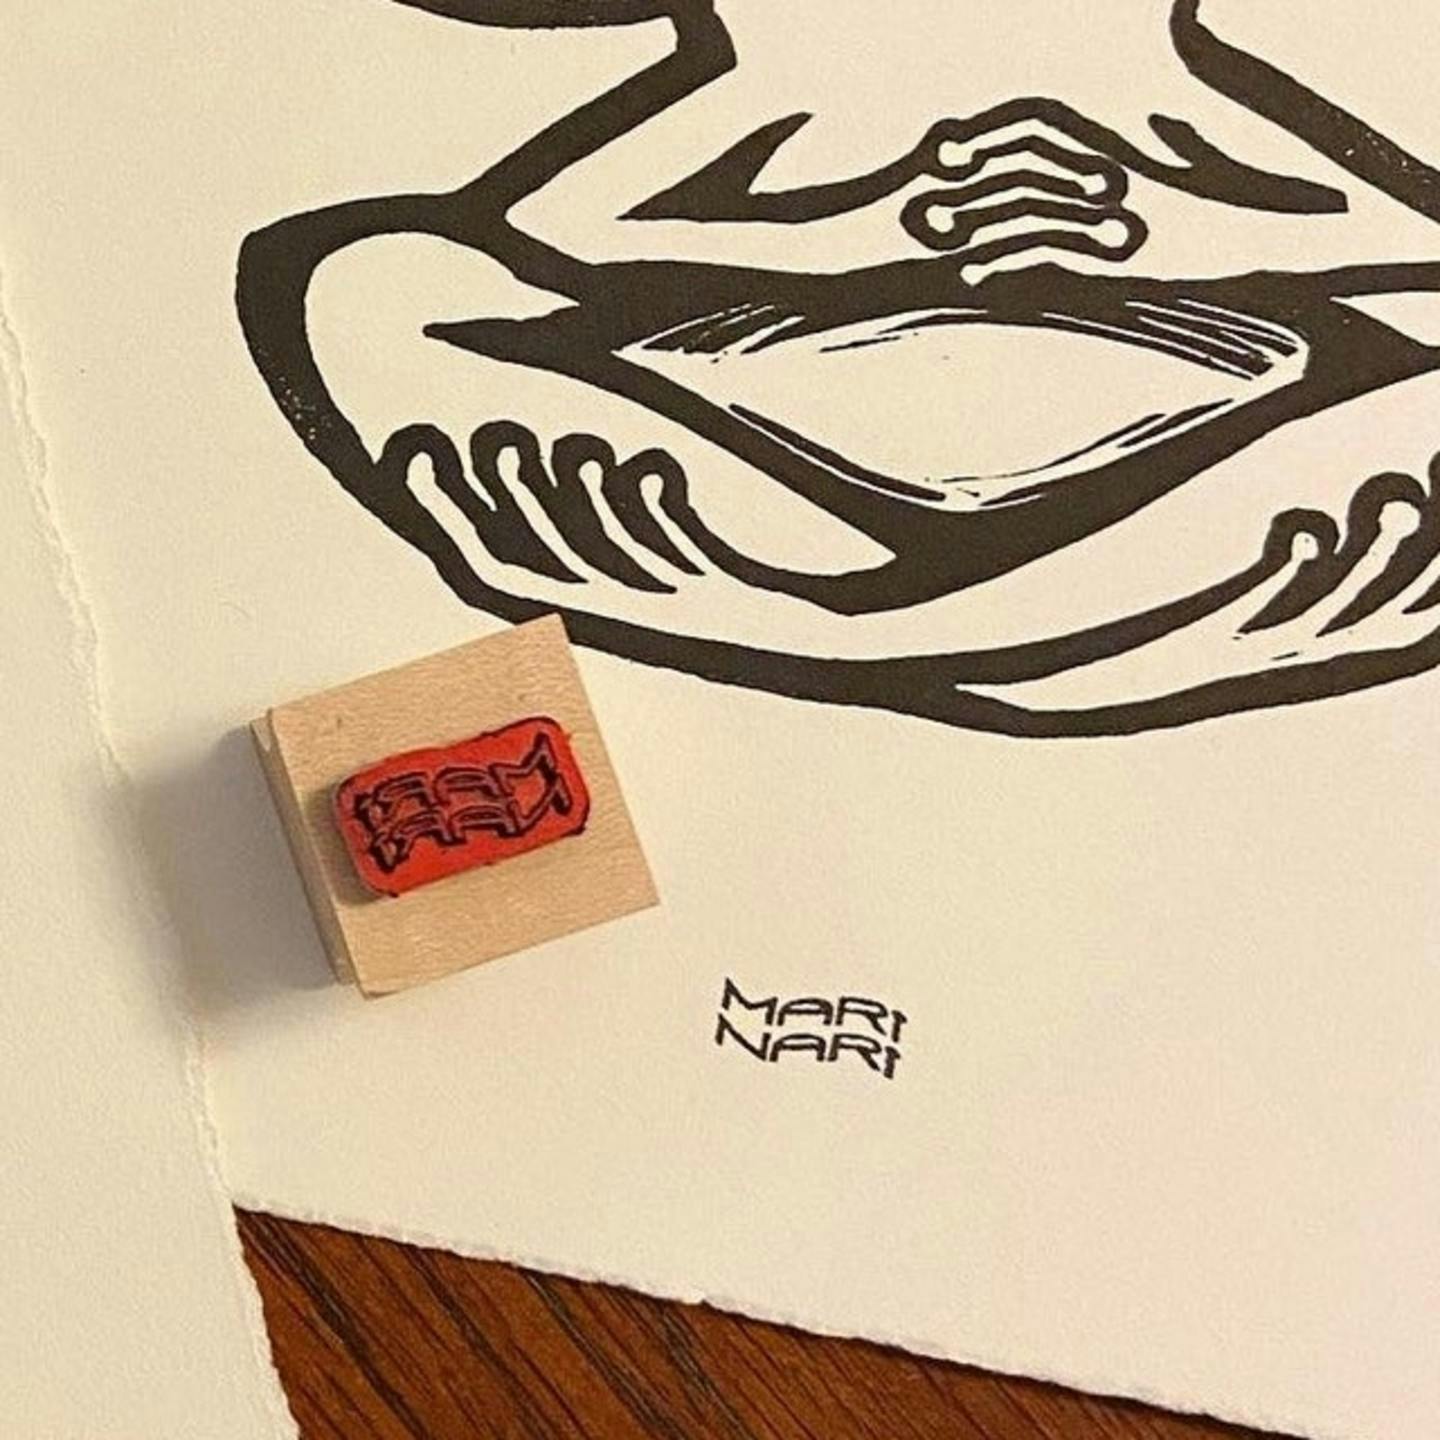 Images of Small Wood Stamp (2)